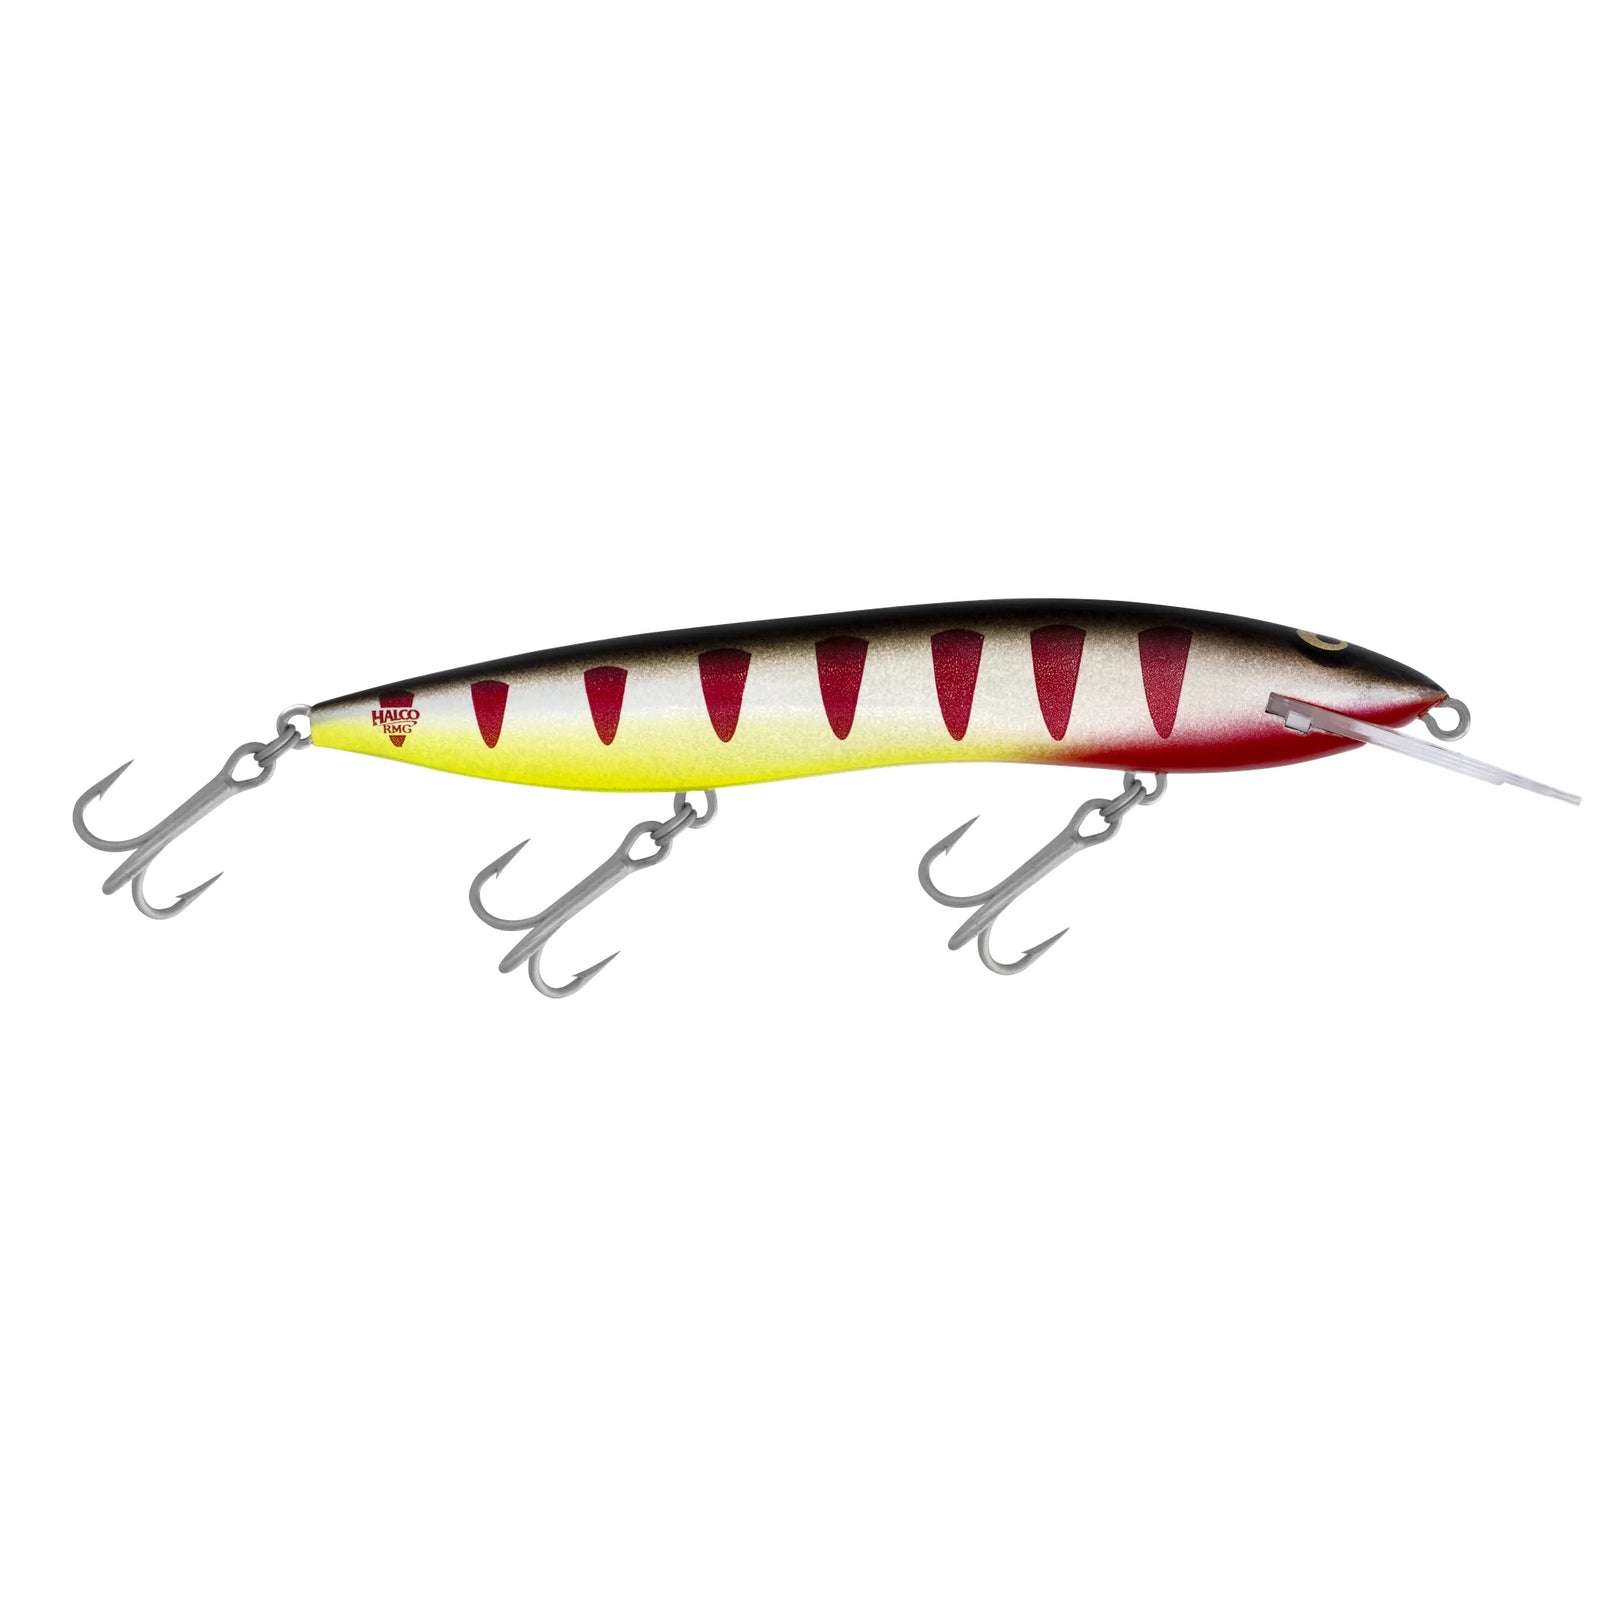 Nomad Swimtrex 66 - Compleat Angler Nedlands Pro Tackle